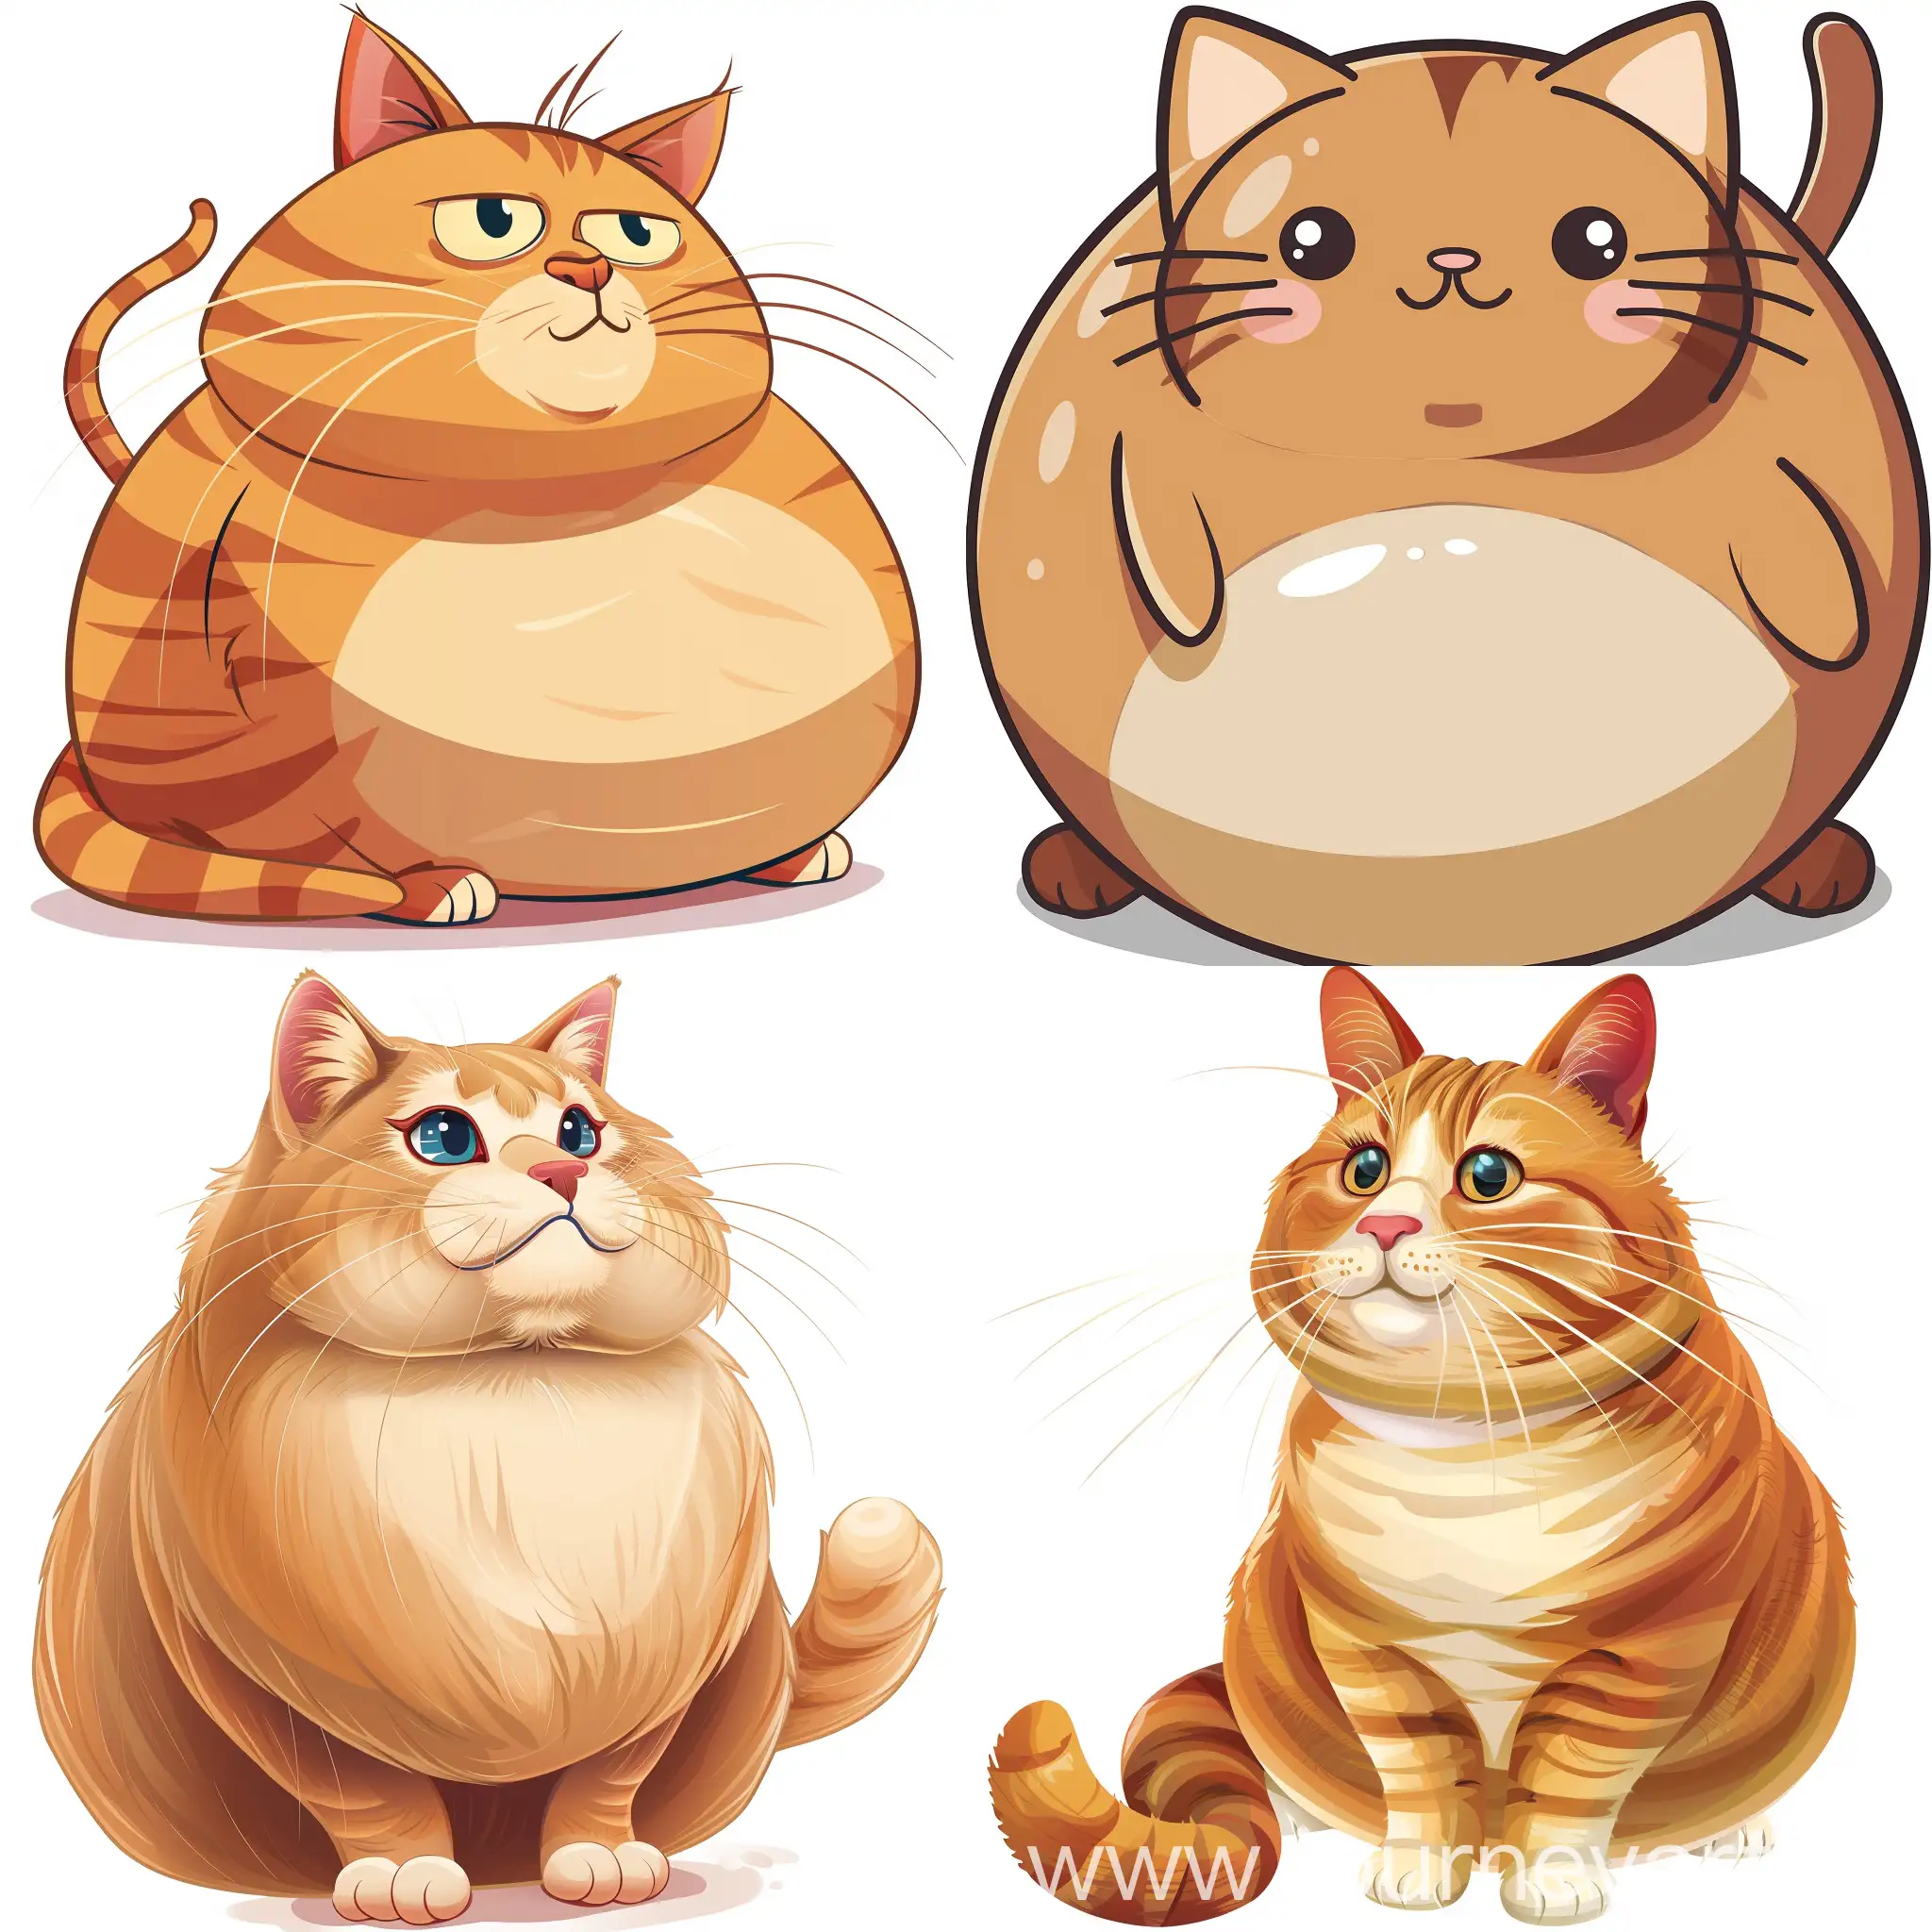 Adorable-Fat-Cat-Clip-Art-with-Playful-Expression